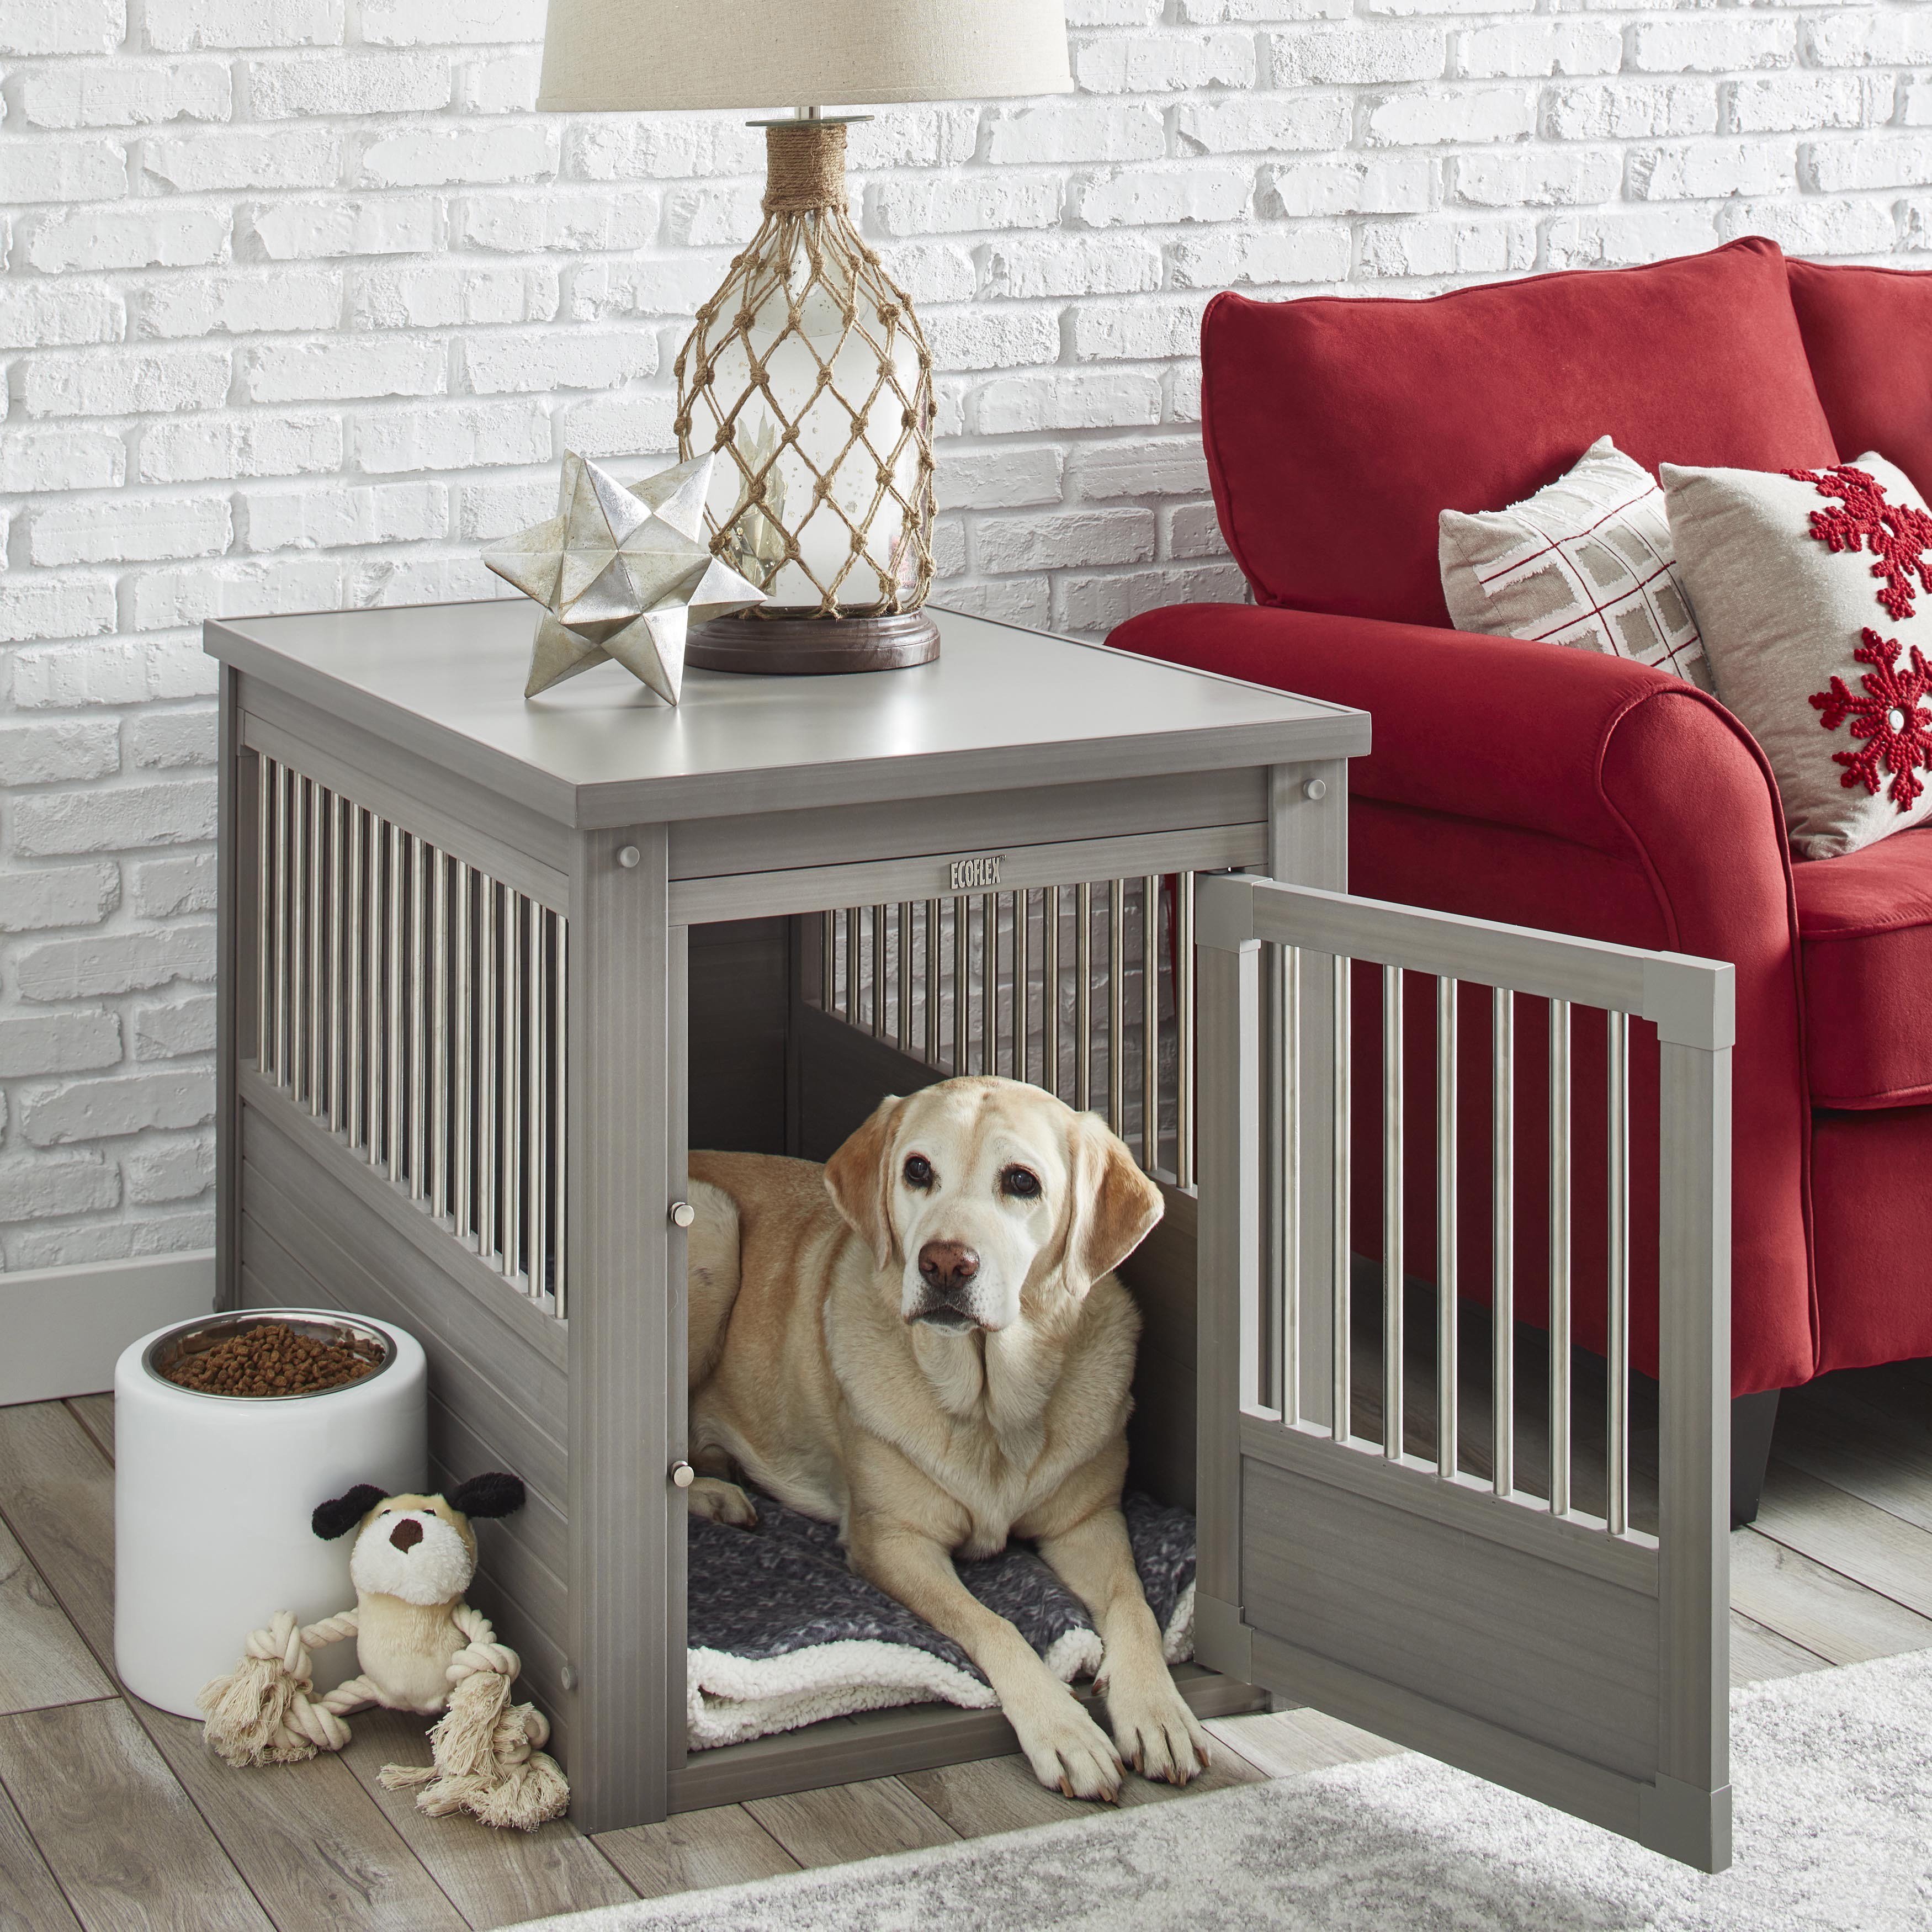 dog containment find great supplies ping crates that look like end tables hampton bay patio chairs wall colors with brown leather furniture kmart rugs modern contemporary glass